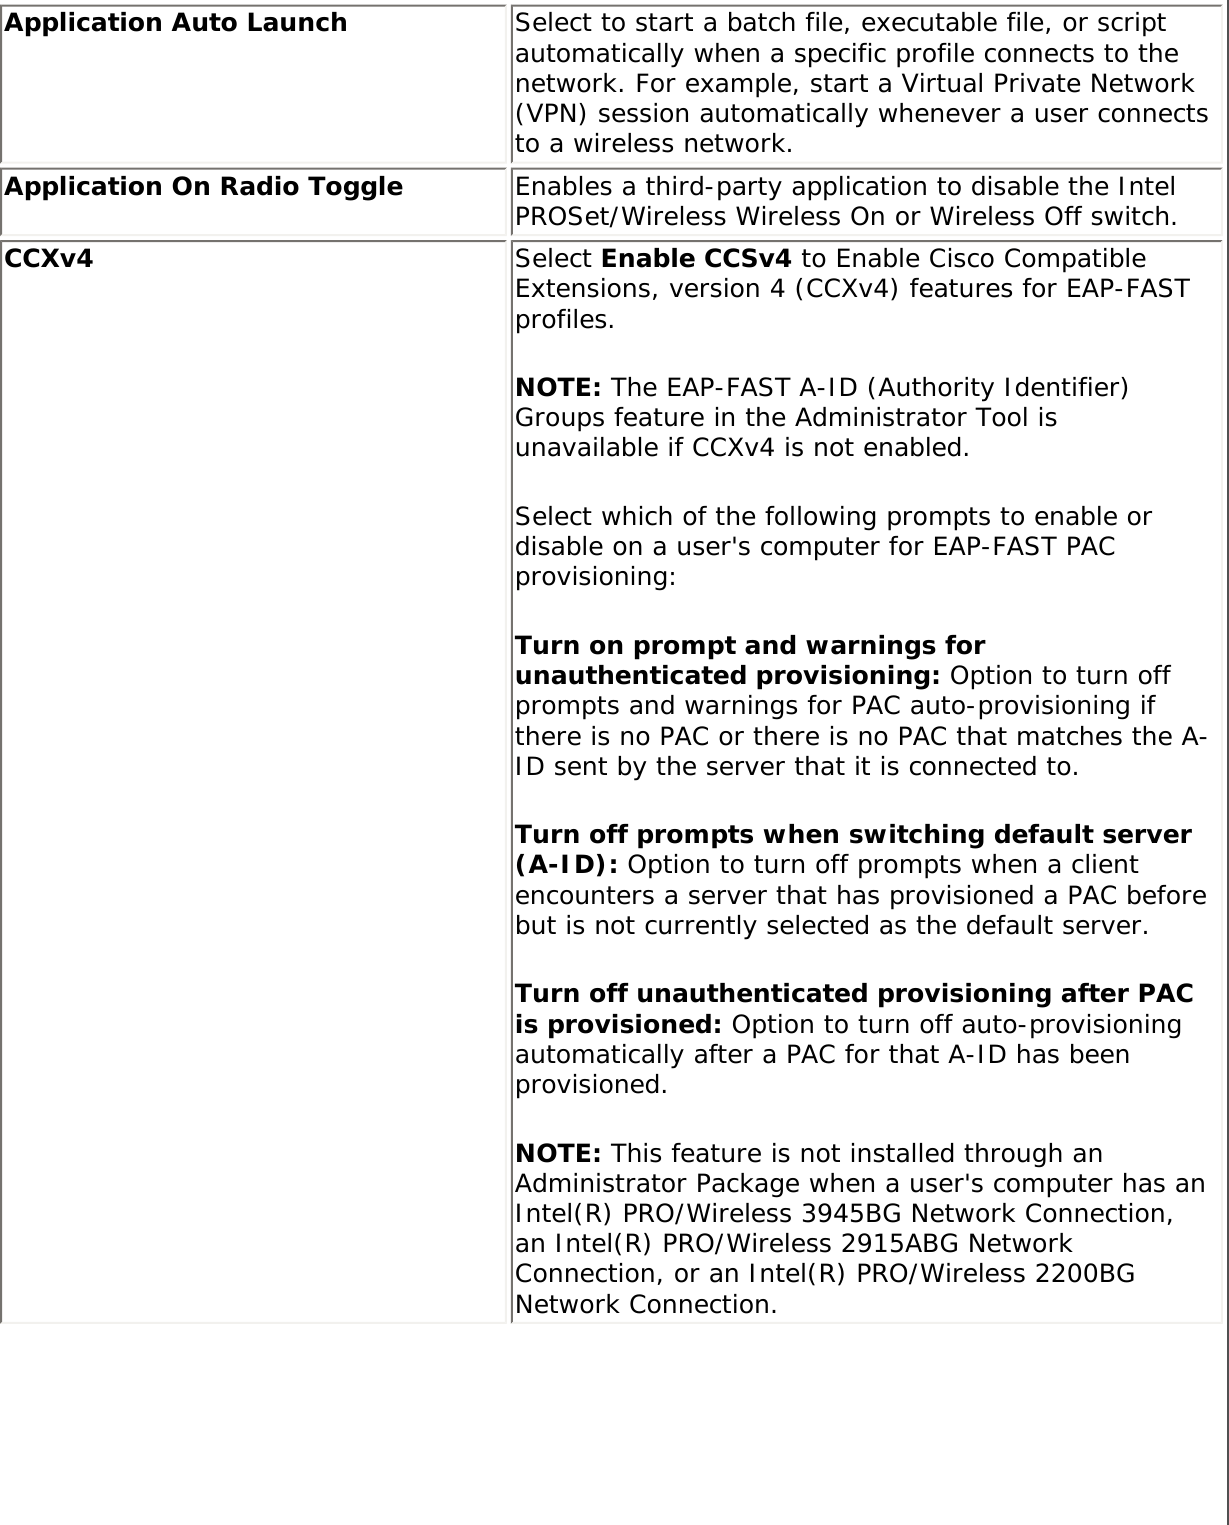 Application Auto Launch Select to start a batch file, executable file, or script automatically when a specific profile connects to the network. For example, start a Virtual Private Network (VPN) session automatically whenever a user connects to a wireless network. Application On Radio Toggle  Enables a third-party application to disable the Intel PROSet/Wireless Wireless On or Wireless Off switch. CCXv4  Select Enable CCSv4 to Enable Cisco Compatible Extensions, version 4 (CCXv4) features for EAP-FAST profiles.NOTE: The EAP-FAST A-ID (Authority Identifier) Groups feature in the Administrator Tool is unavailable if CCXv4 is not enabled.Select which of the following prompts to enable or disable on a user&apos;s computer for EAP-FAST PAC provisioning:Turn on prompt and warnings for unauthenticated provisioning: Option to turn off prompts and warnings for PAC auto-provisioning if there is no PAC or there is no PAC that matches the A-ID sent by the server that it is connected to. Turn off prompts when switching default server (A-ID): Option to turn off prompts when a client encounters a server that has provisioned a PAC before but is not currently selected as the default server.Turn off unauthenticated provisioning after PAC is provisioned: Option to turn off auto-provisioning automatically after a PAC for that A-ID has been provisioned. NOTE: This feature is not installed through an Administrator Package when a user&apos;s computer has an Intel(R) PRO/Wireless 3945BG Network Connection, an Intel(R) PRO/Wireless 2915ABG Network Connection, or an Intel(R) PRO/Wireless 2200BG Network Connection.